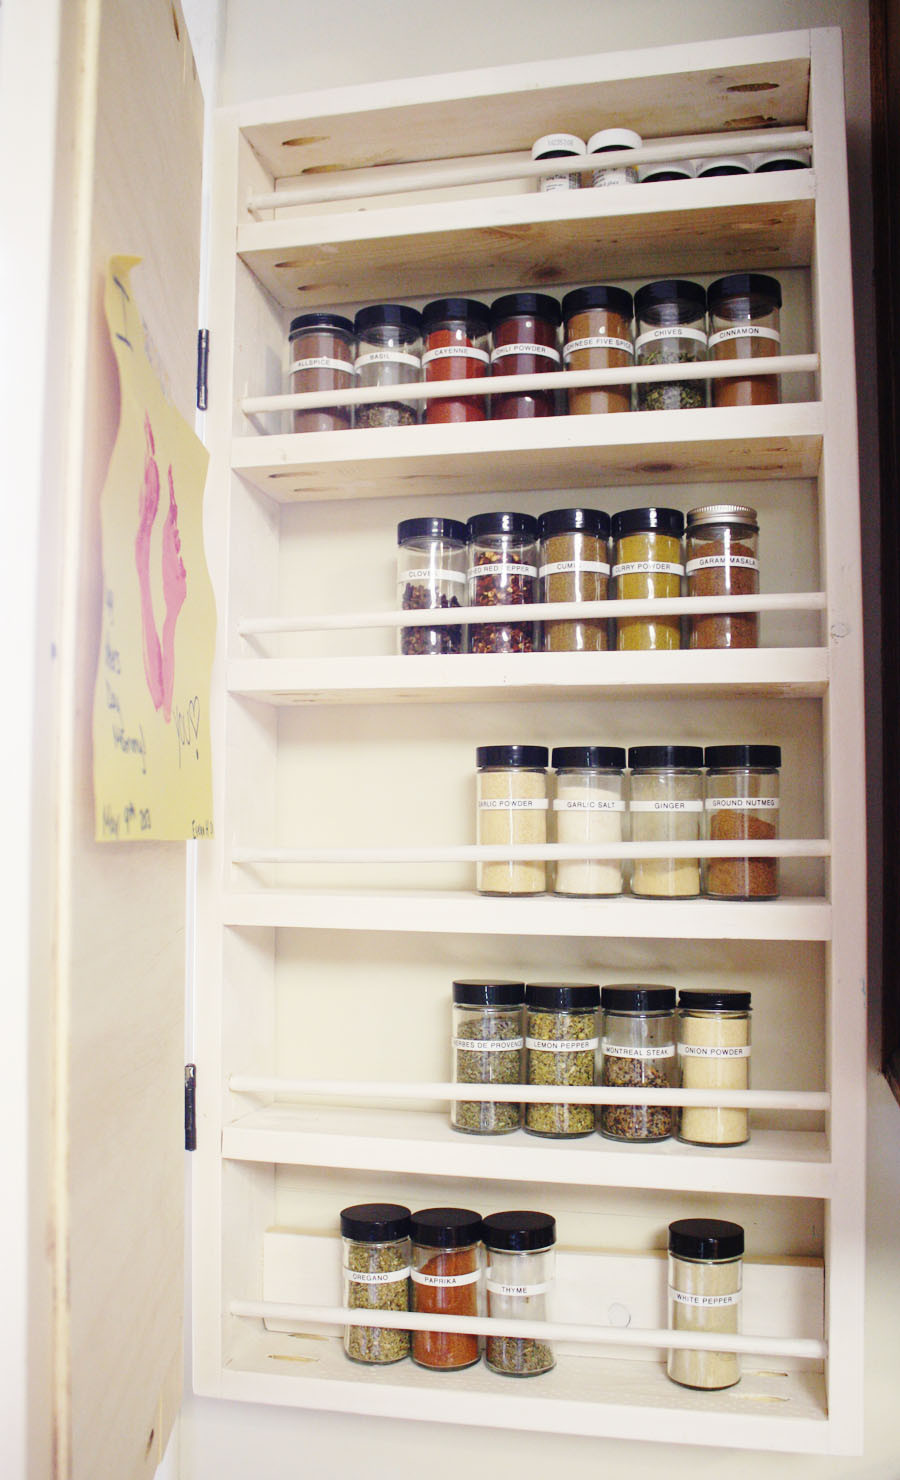 DIY Wooden Spice Rack
 How To Build A DIY Spice Rack